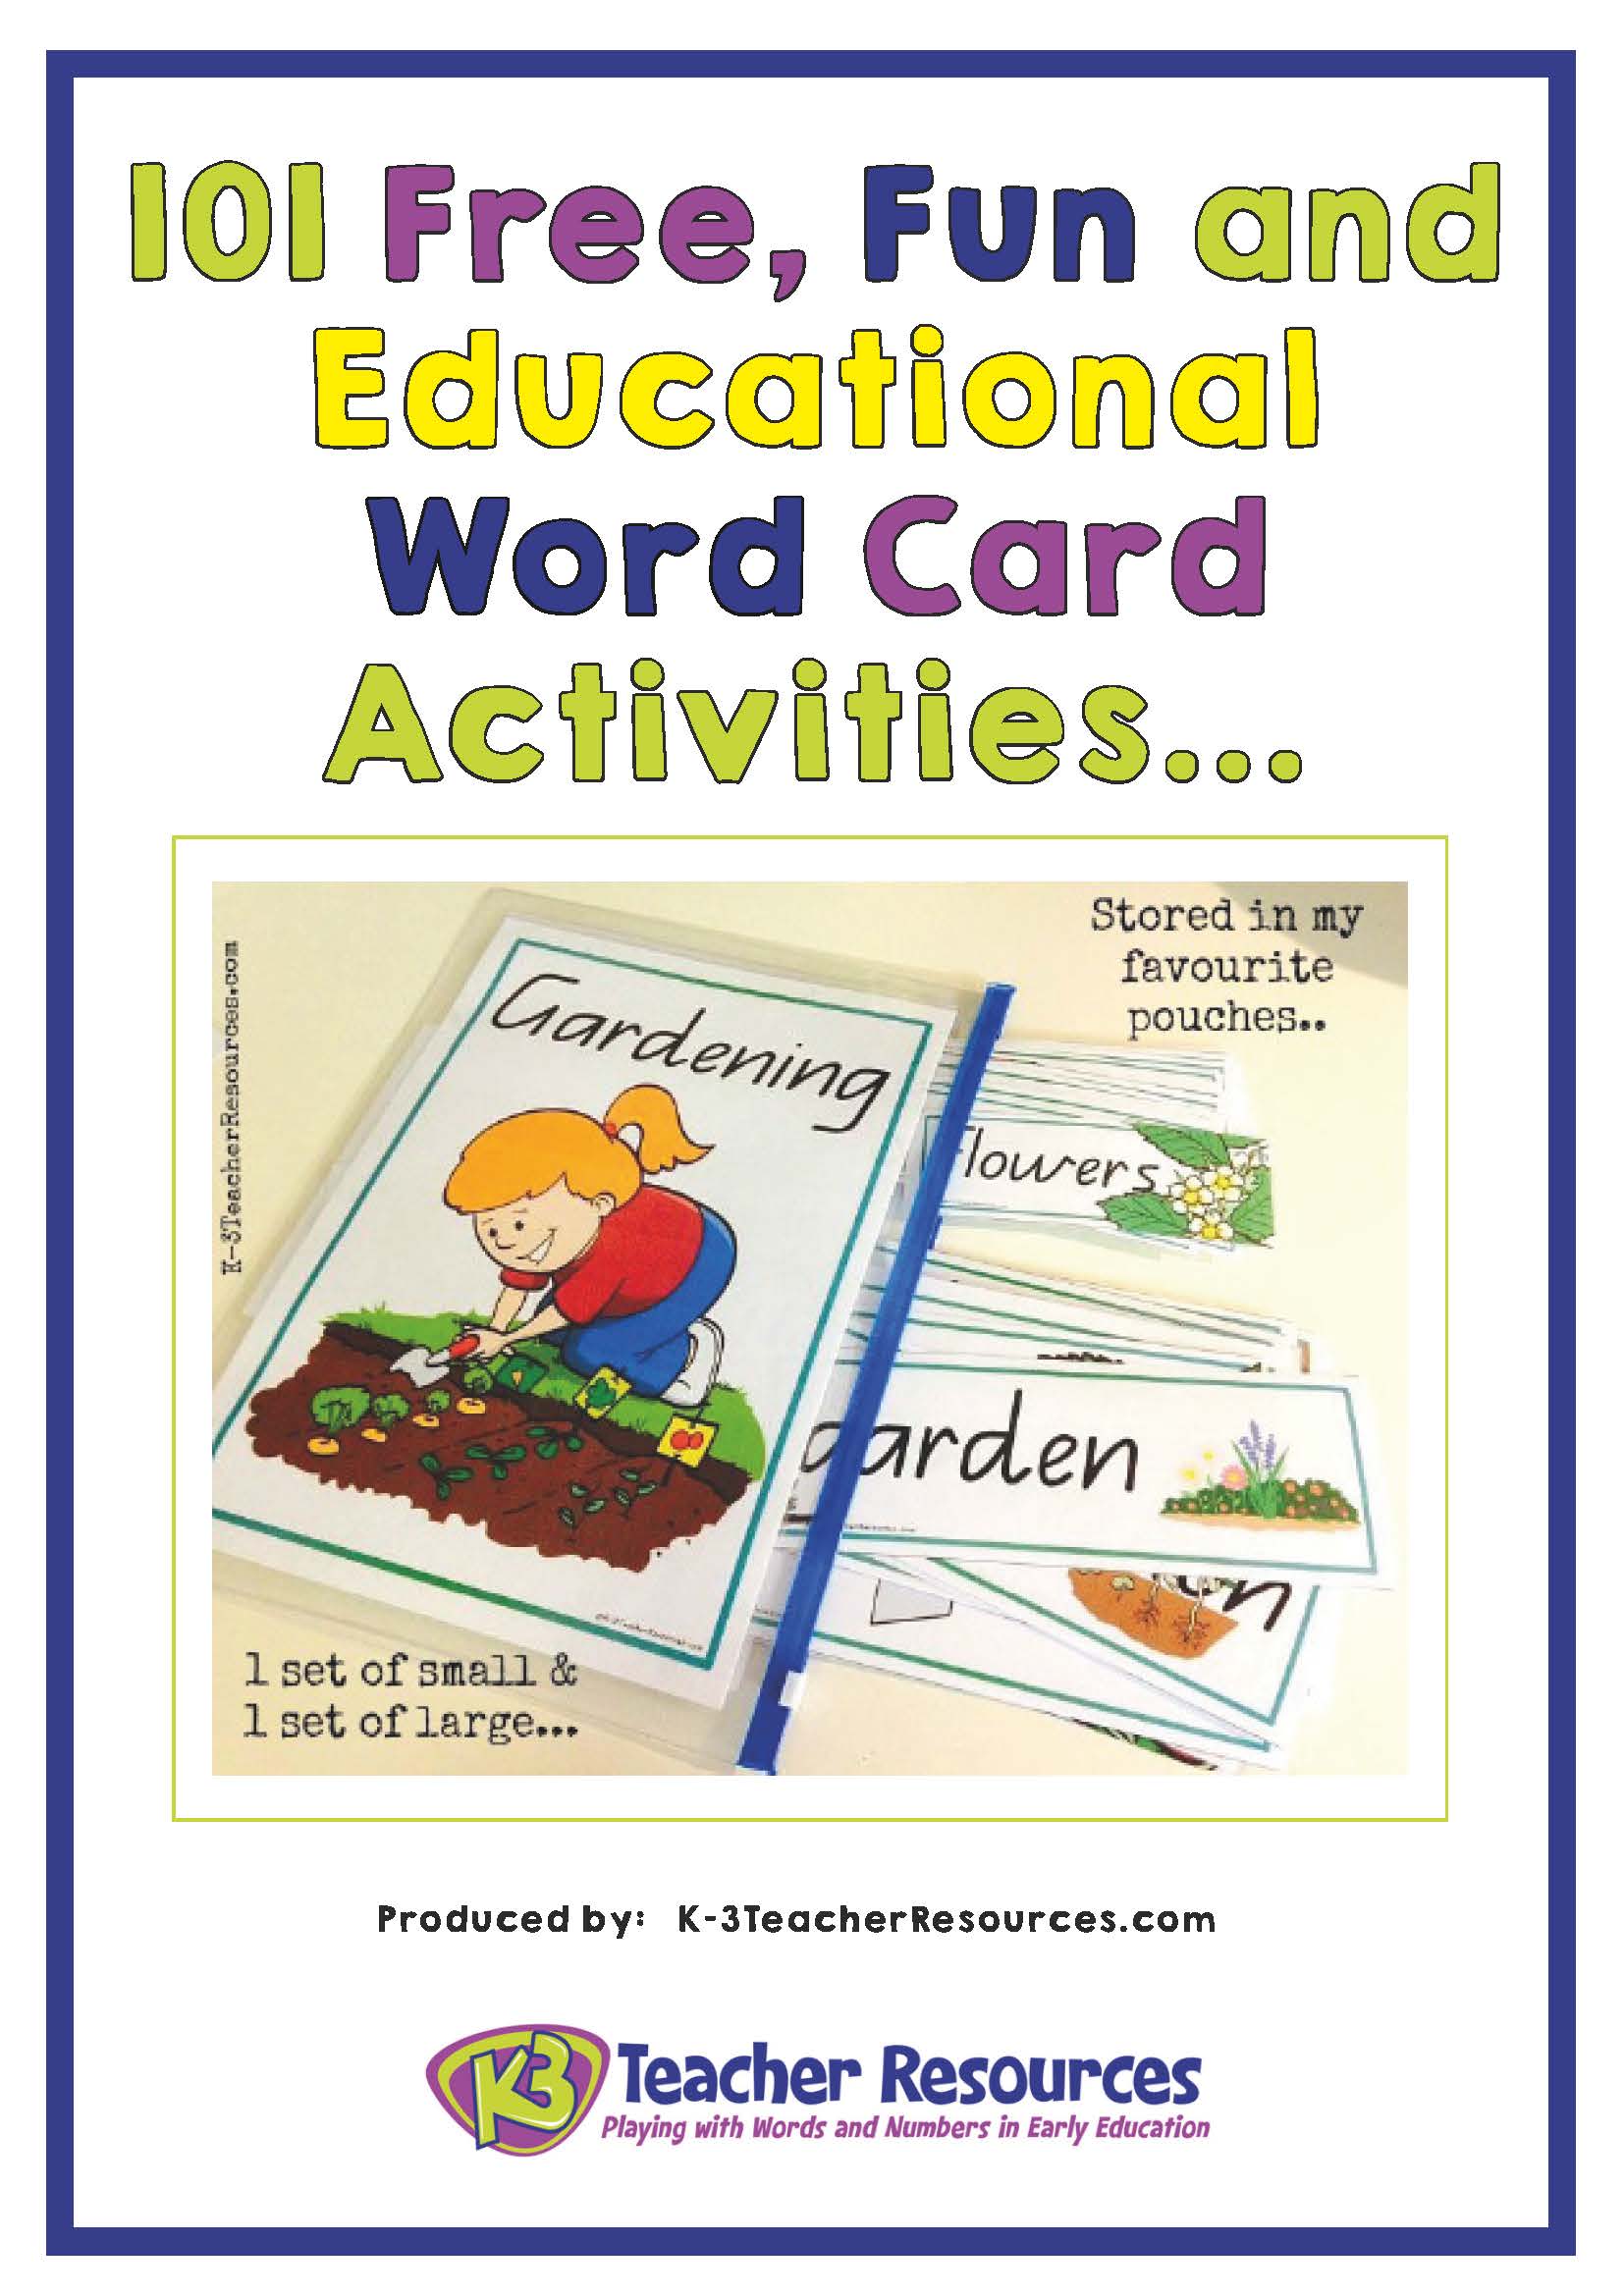 101 Fun And Educational Vocabulary Word Card Activities